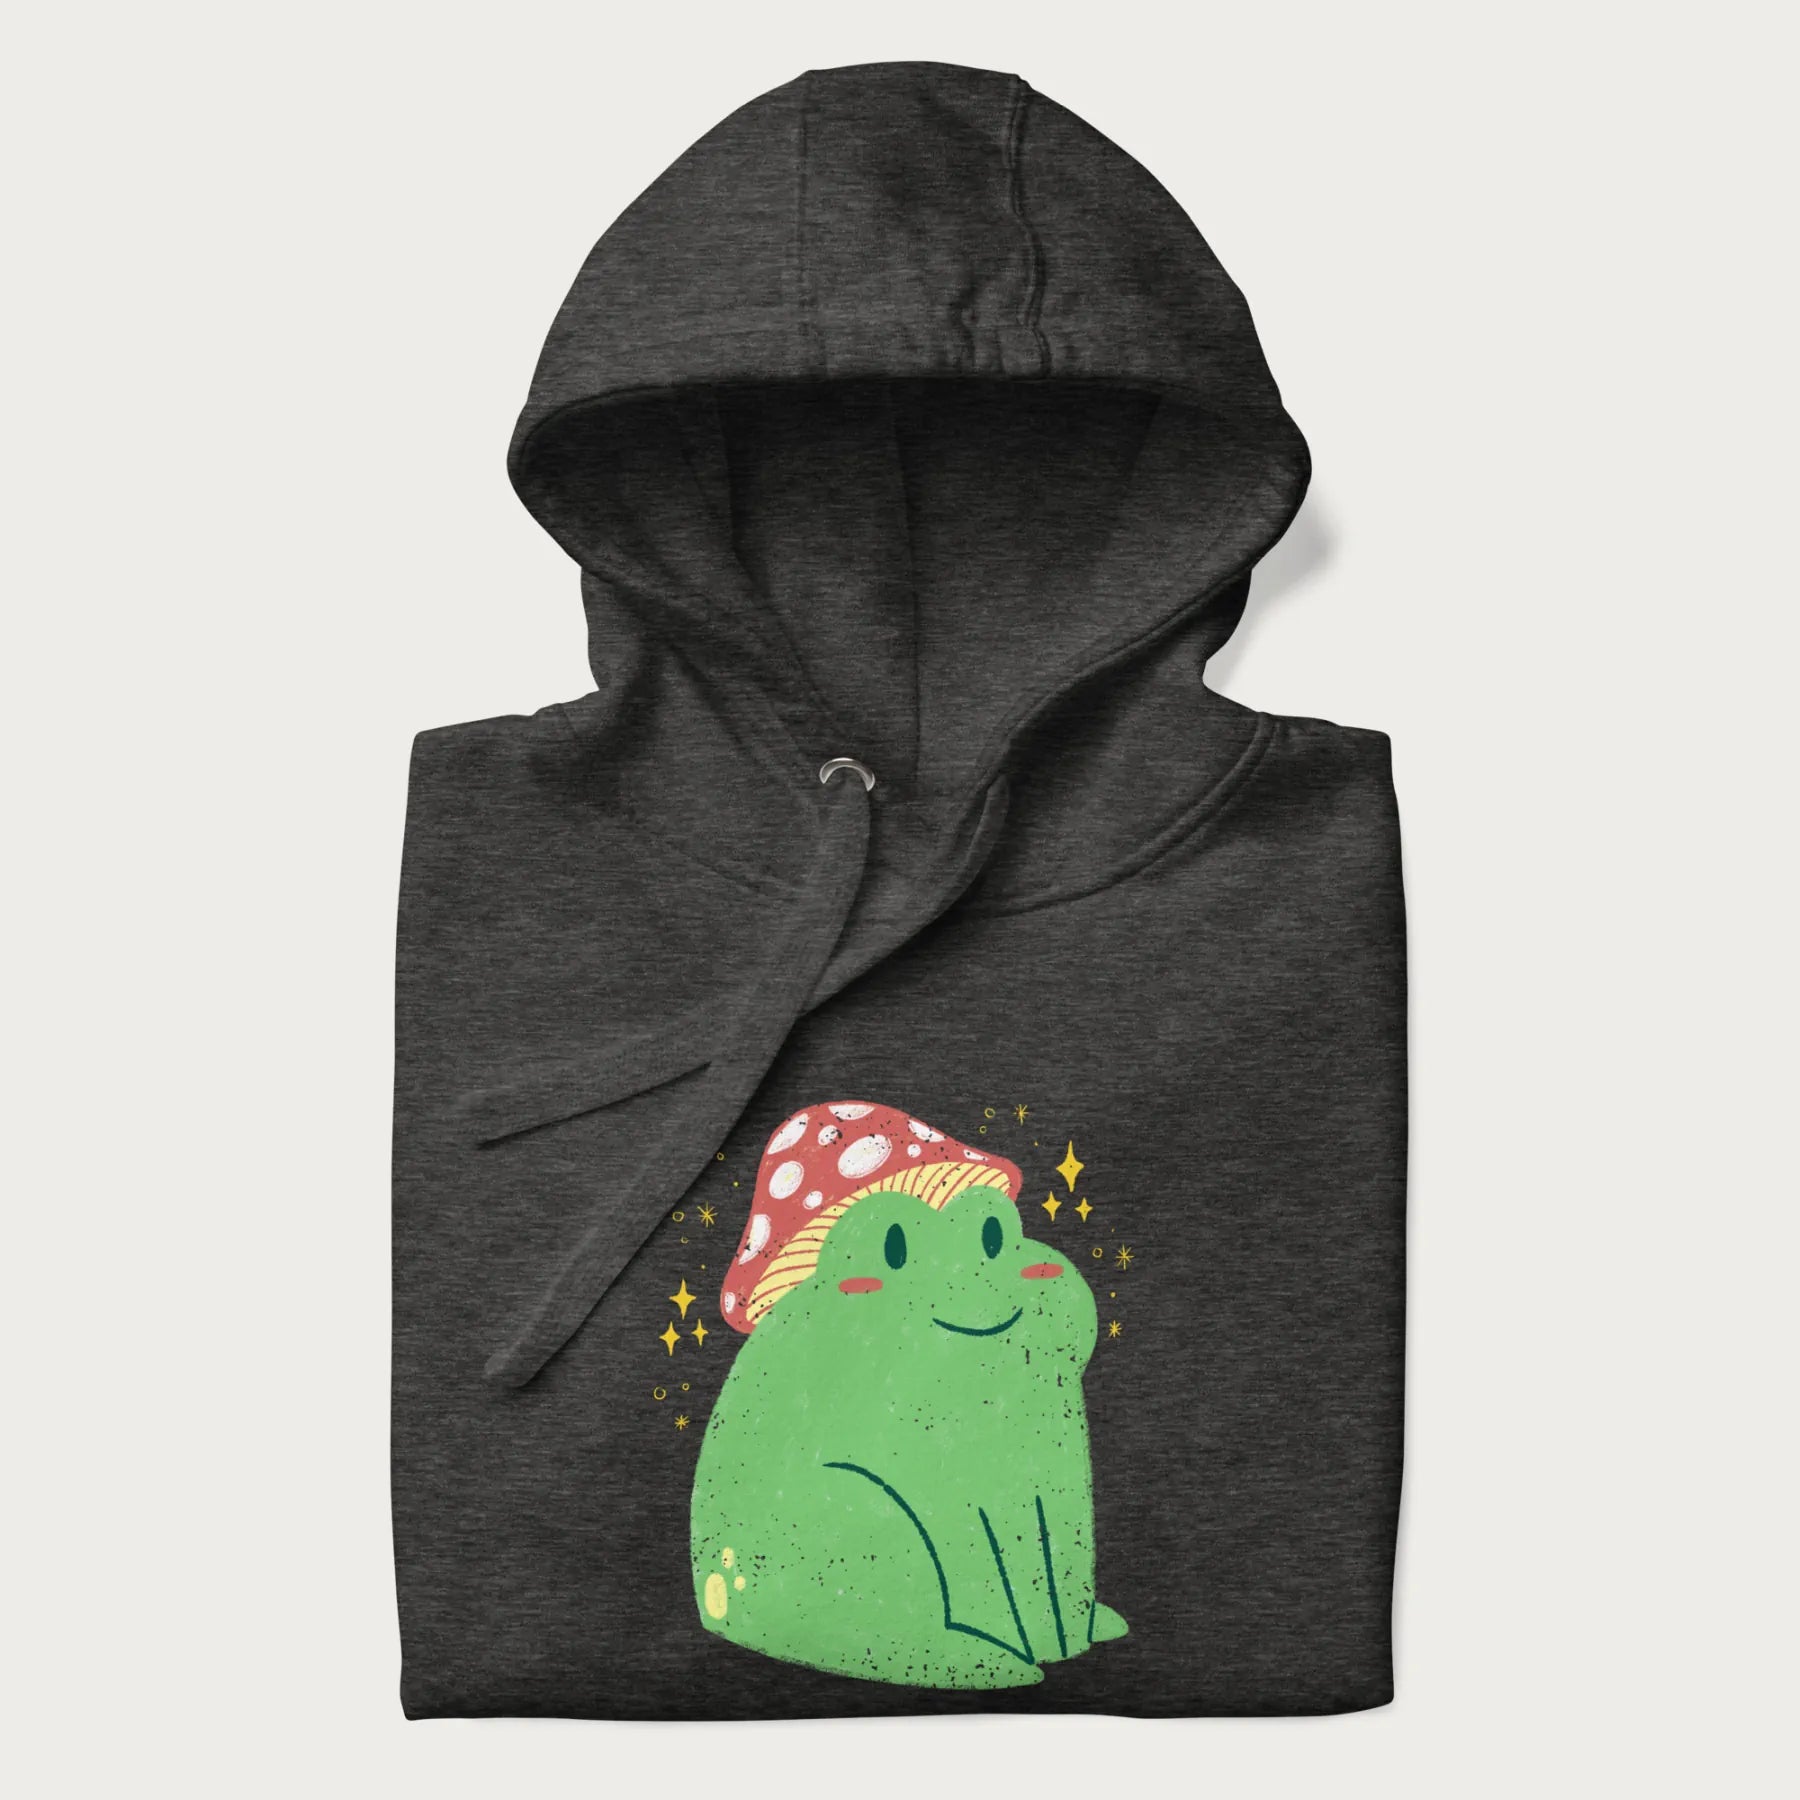 Folded dark grey hoodie with a graphic of a green frog wearing a mushroom cap surrounded by stars.